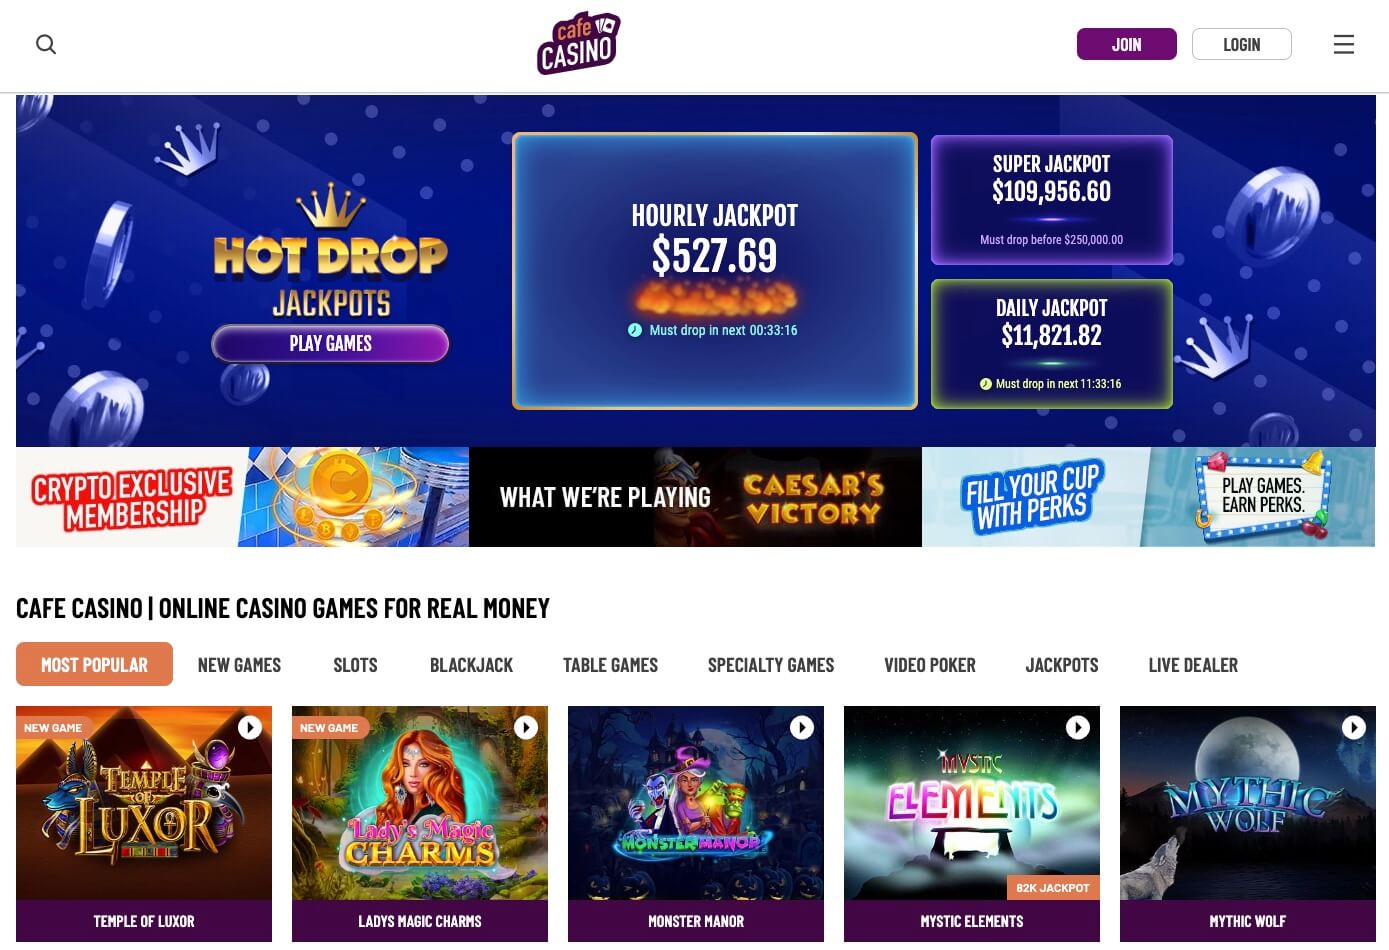 Need More Inspiration With australian online casino sites? Read this!